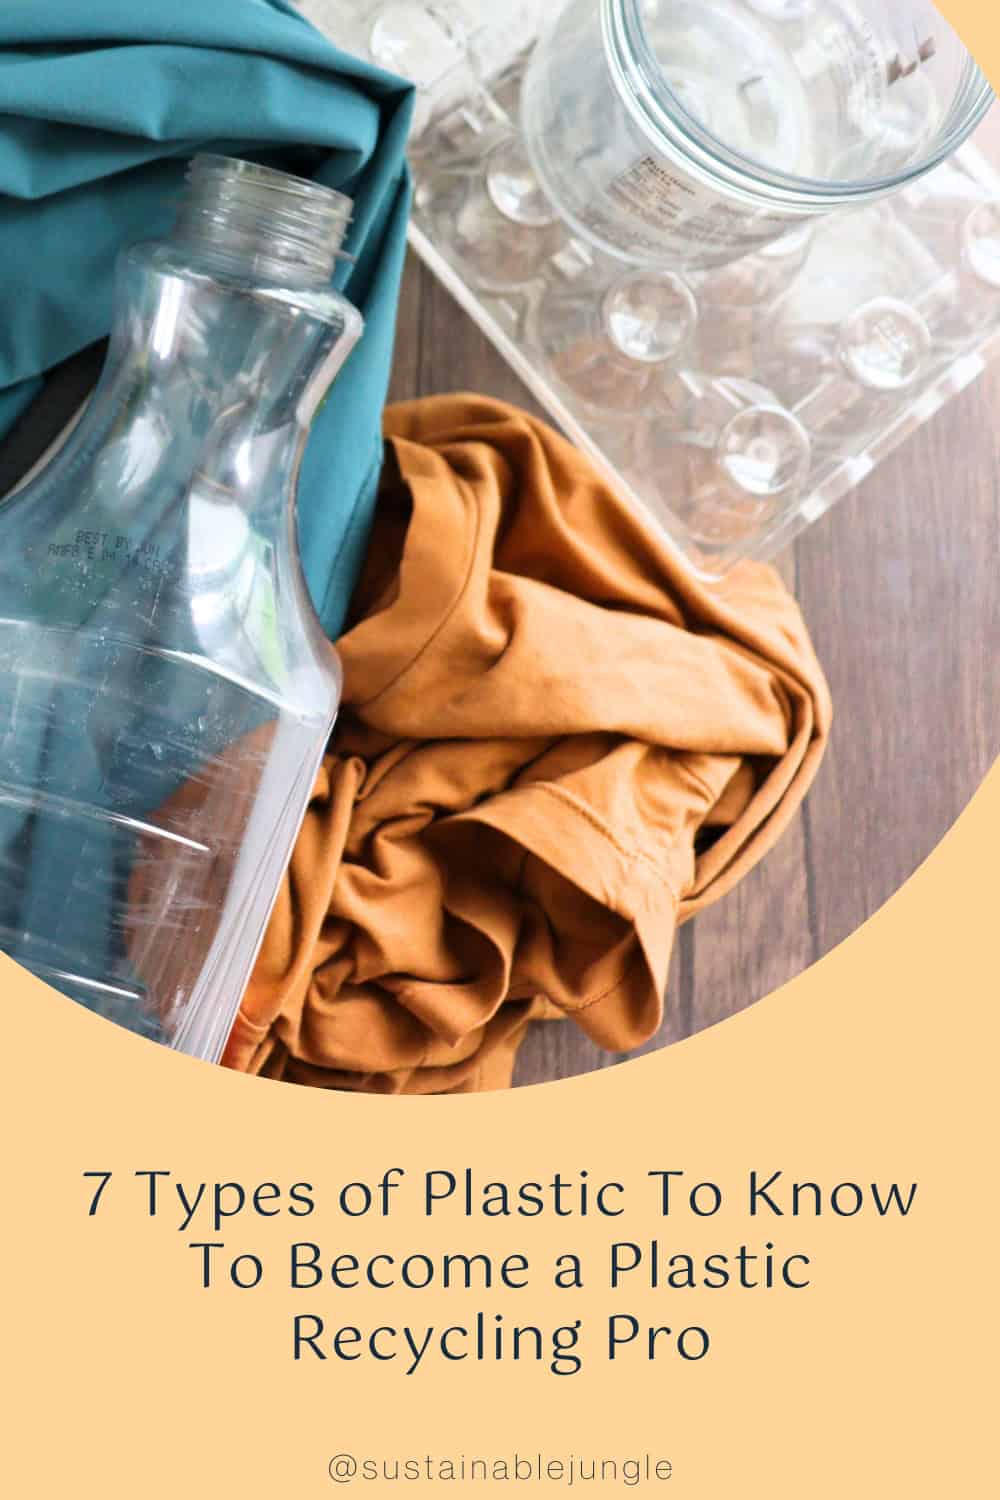 7 Types of Plastic To Know To Become a Plastic Recycling Pro Image by Sustainable Jungle #typesofplastic #7typesofplastic #plastictypes #plasticrecycling #typesofrecyclableplastic #sustainablejungle